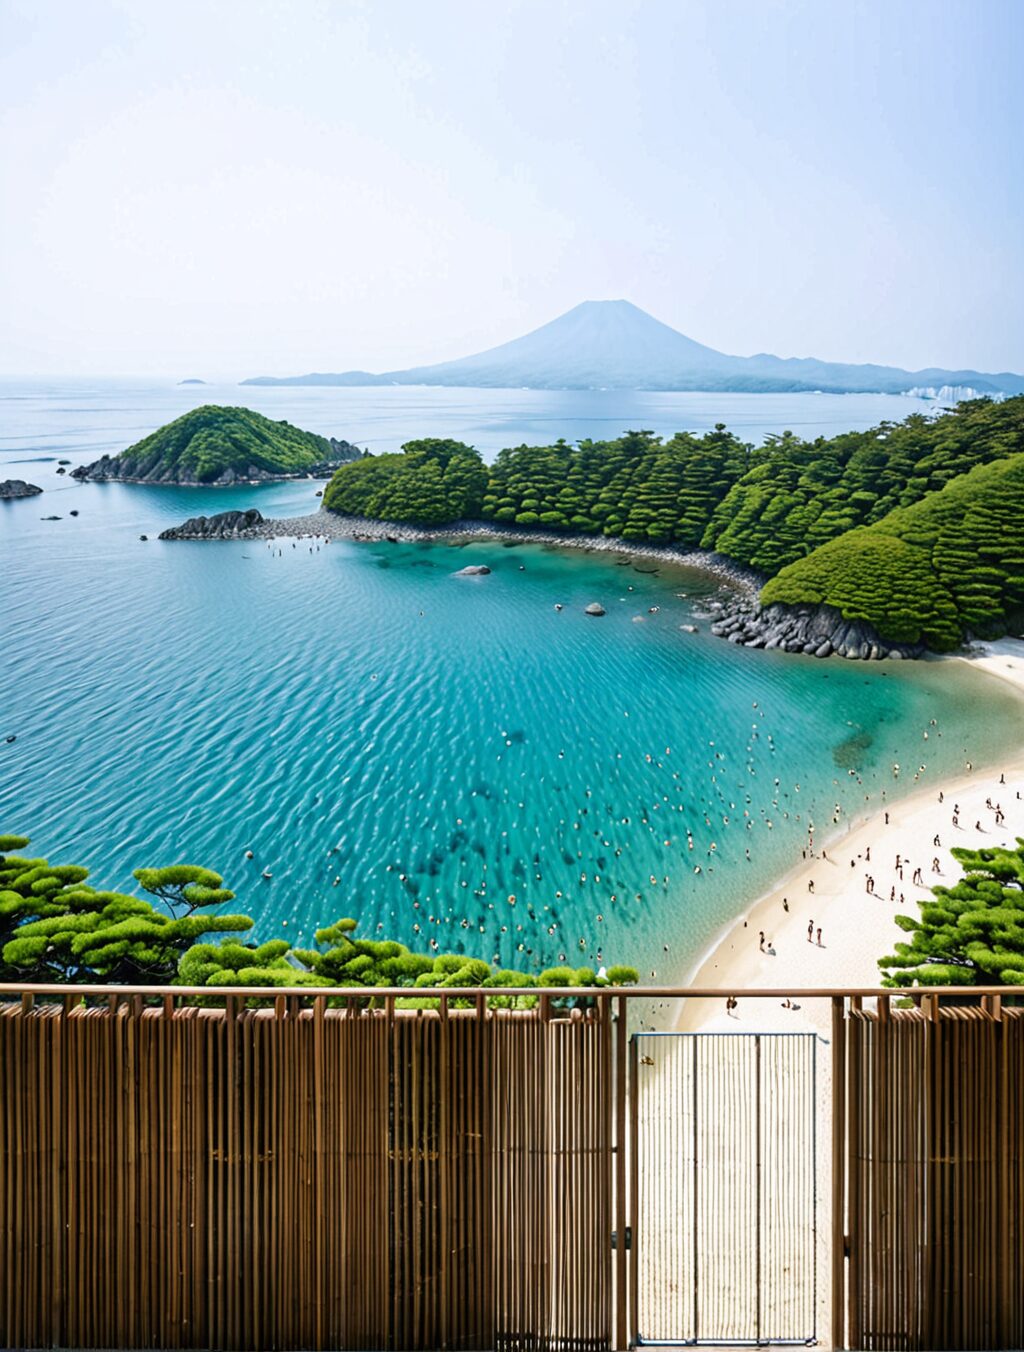 why does japan have no swimmable beaches